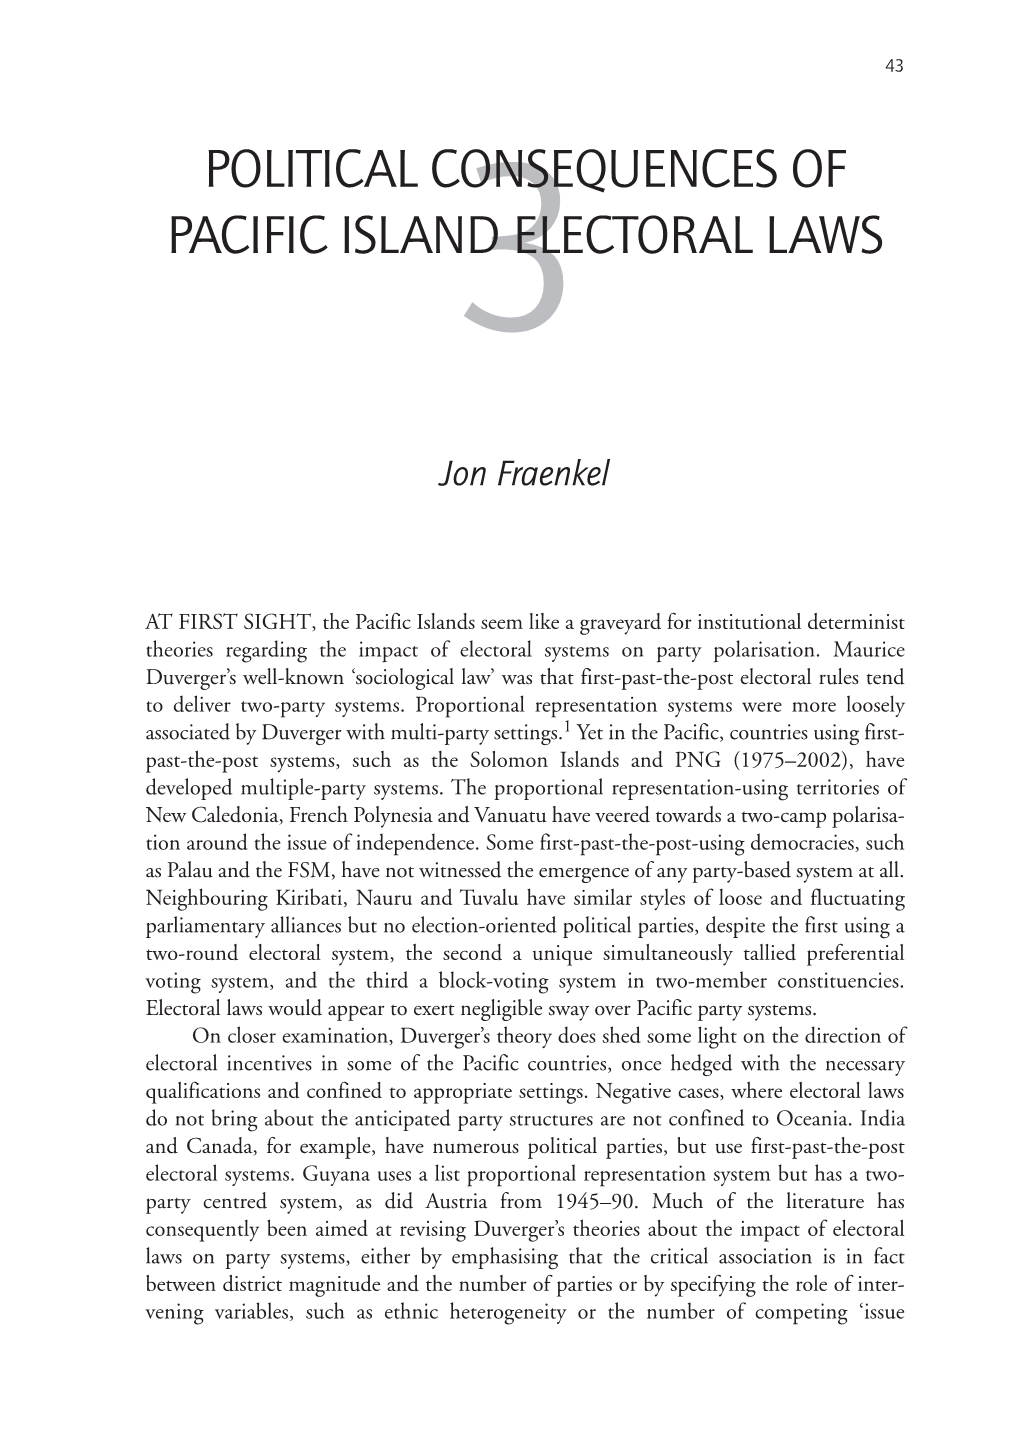 Political Consequences of Pacific Island Electoral Laws 45